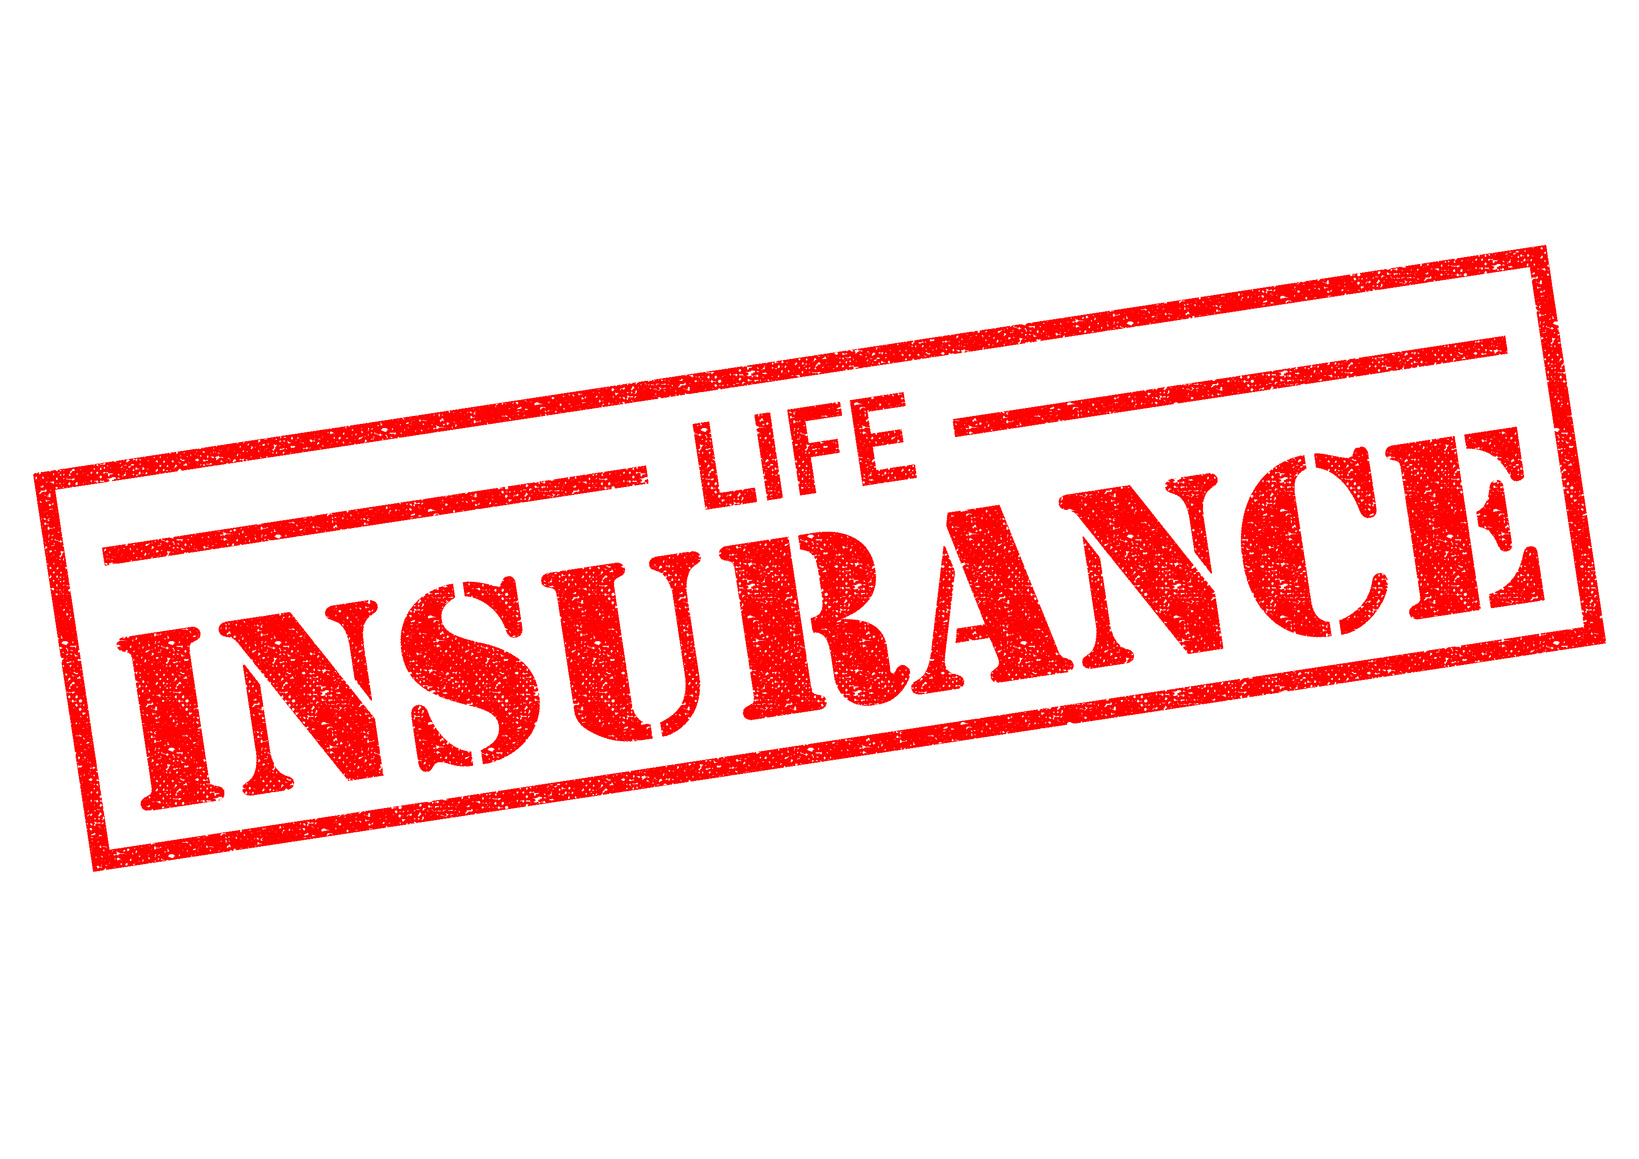 Protecting Your Home Through Life Insurance